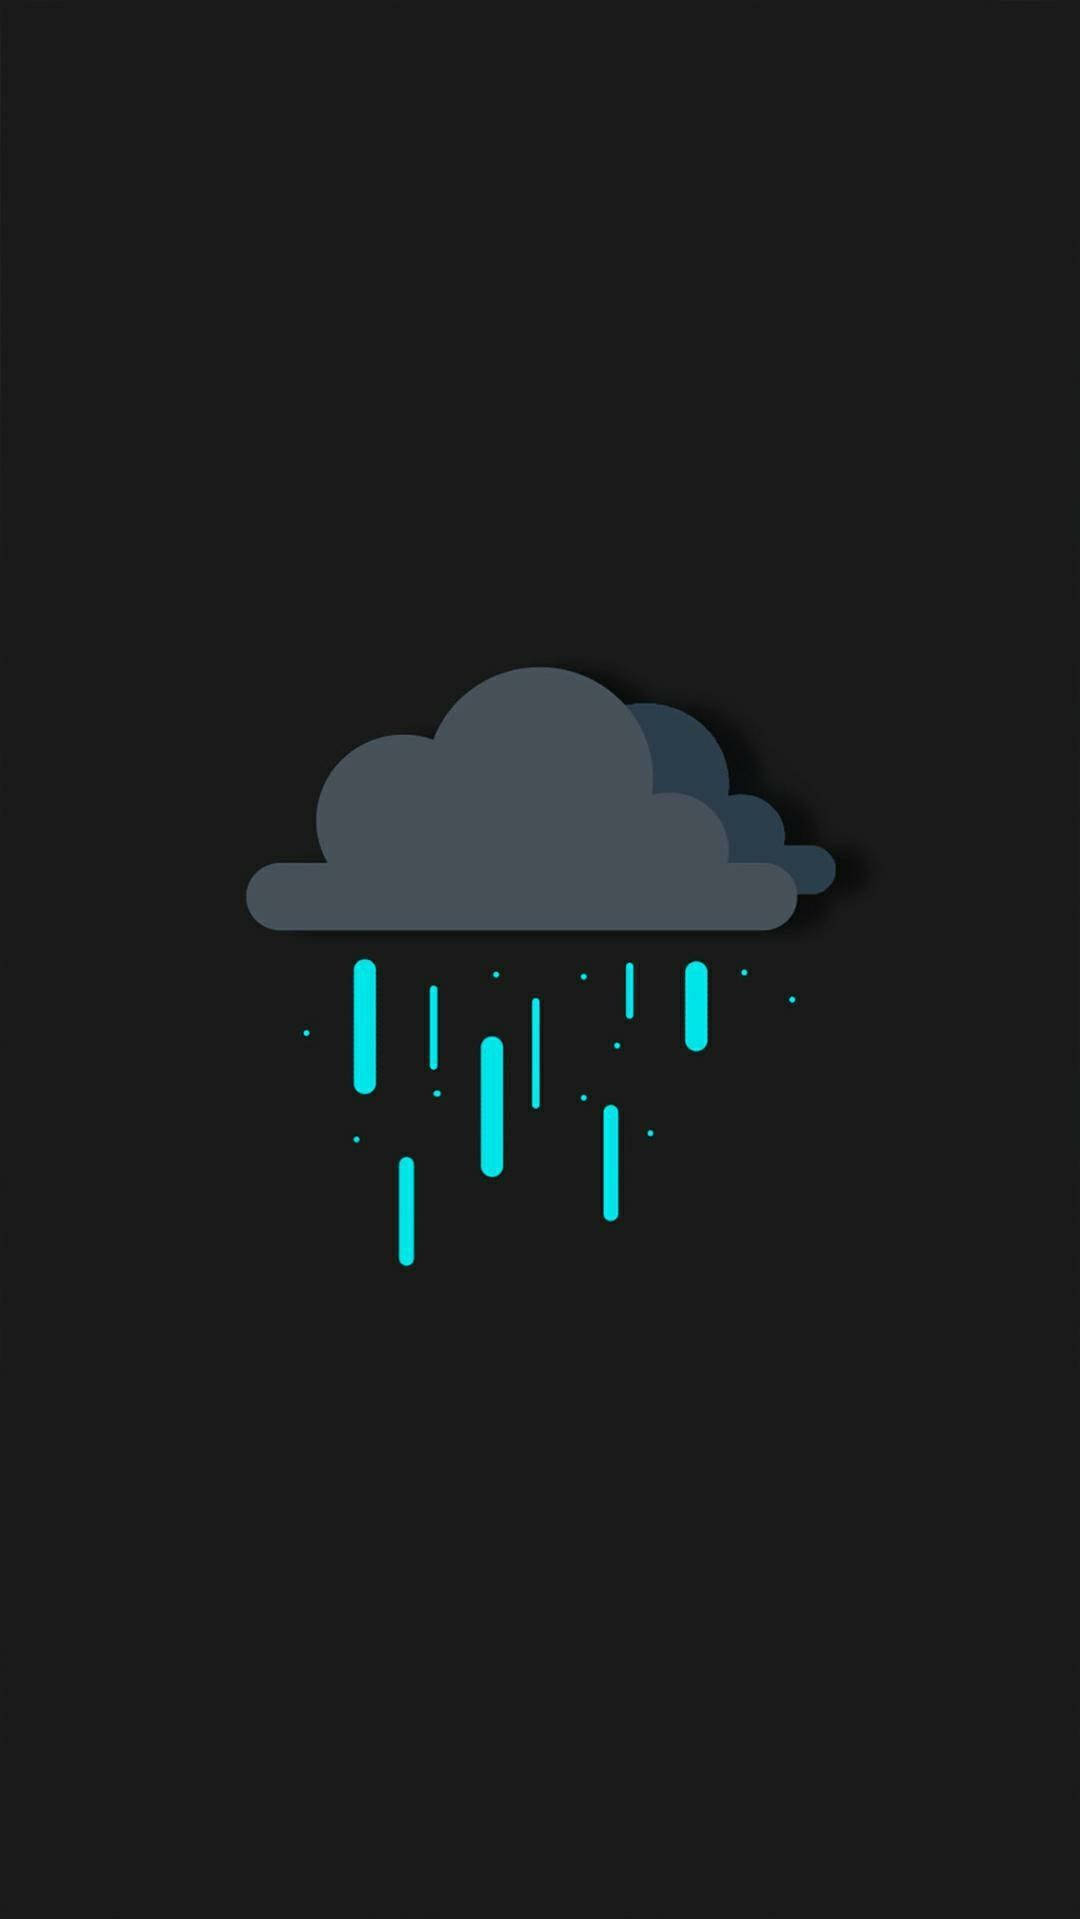 Rain Cloud For Cool Simple Background Wallpaper